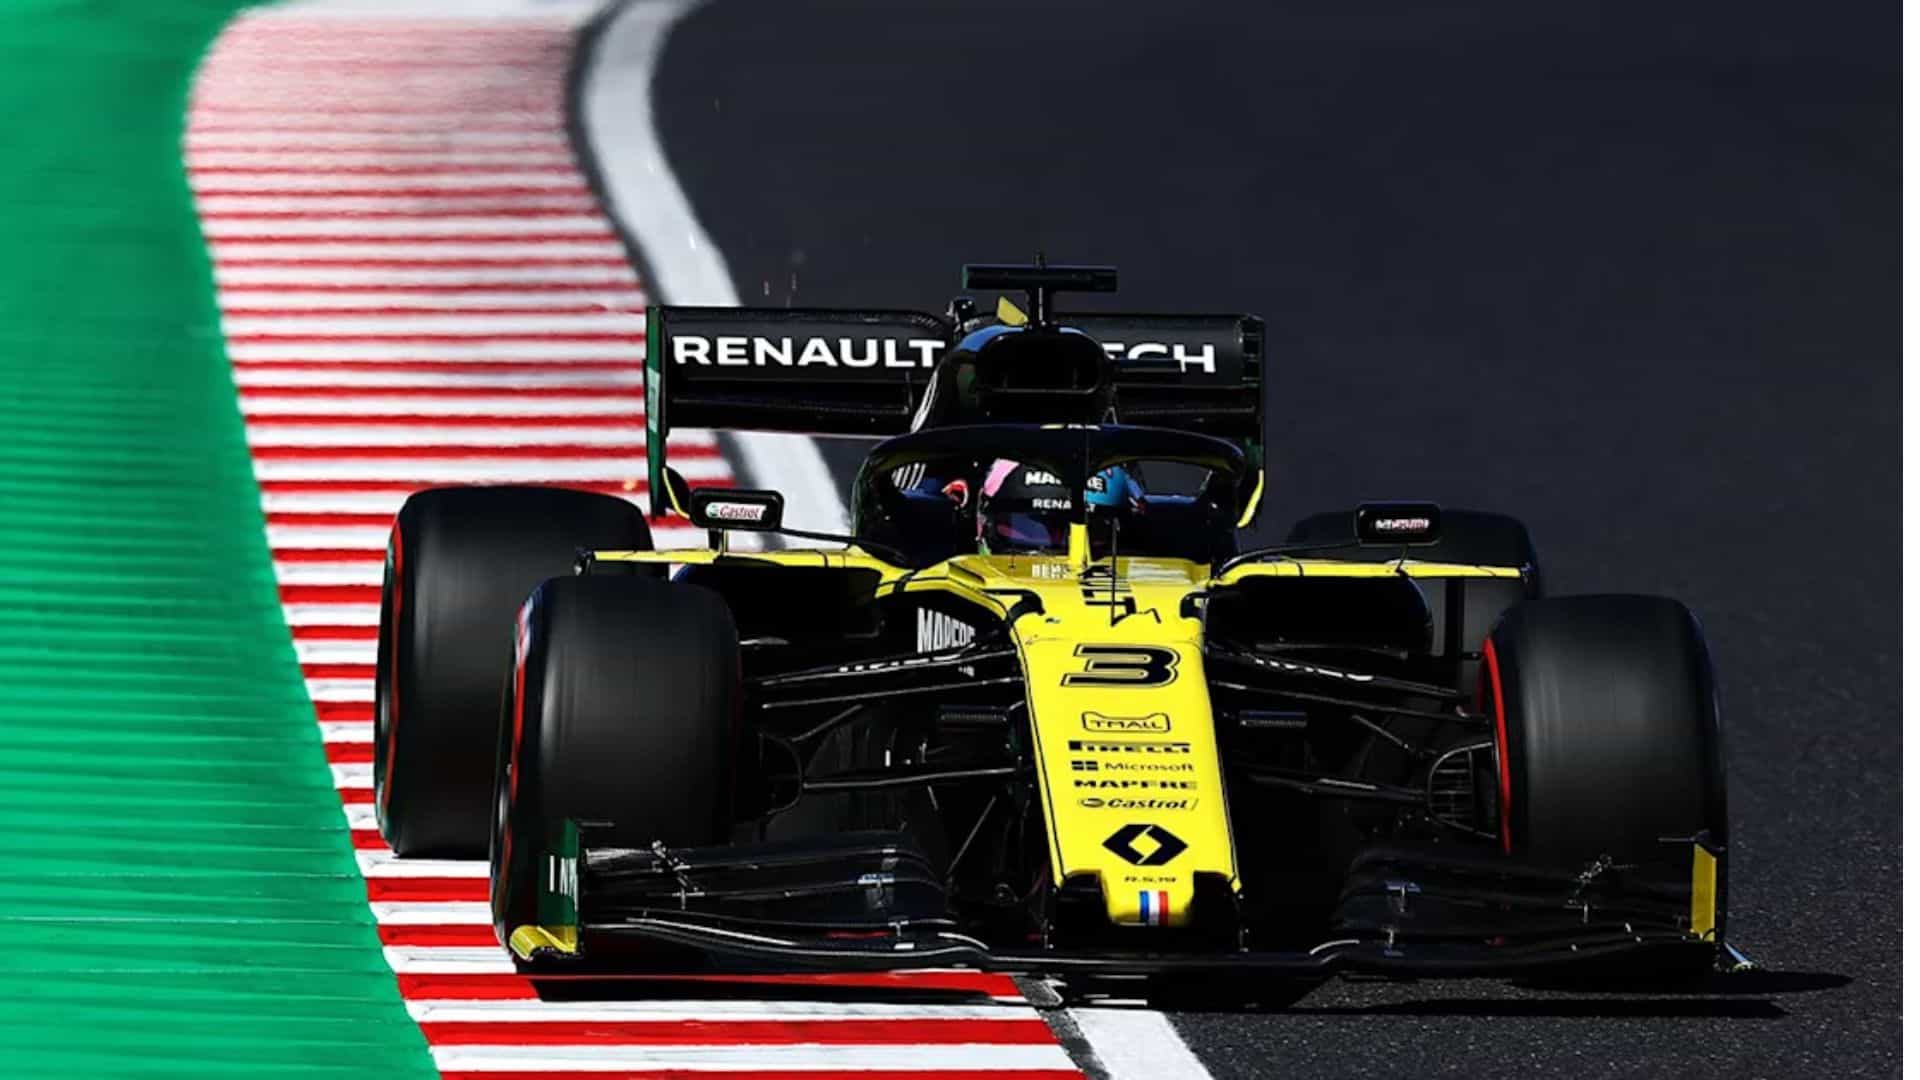 RENAULT DISQUALIFIED 2019